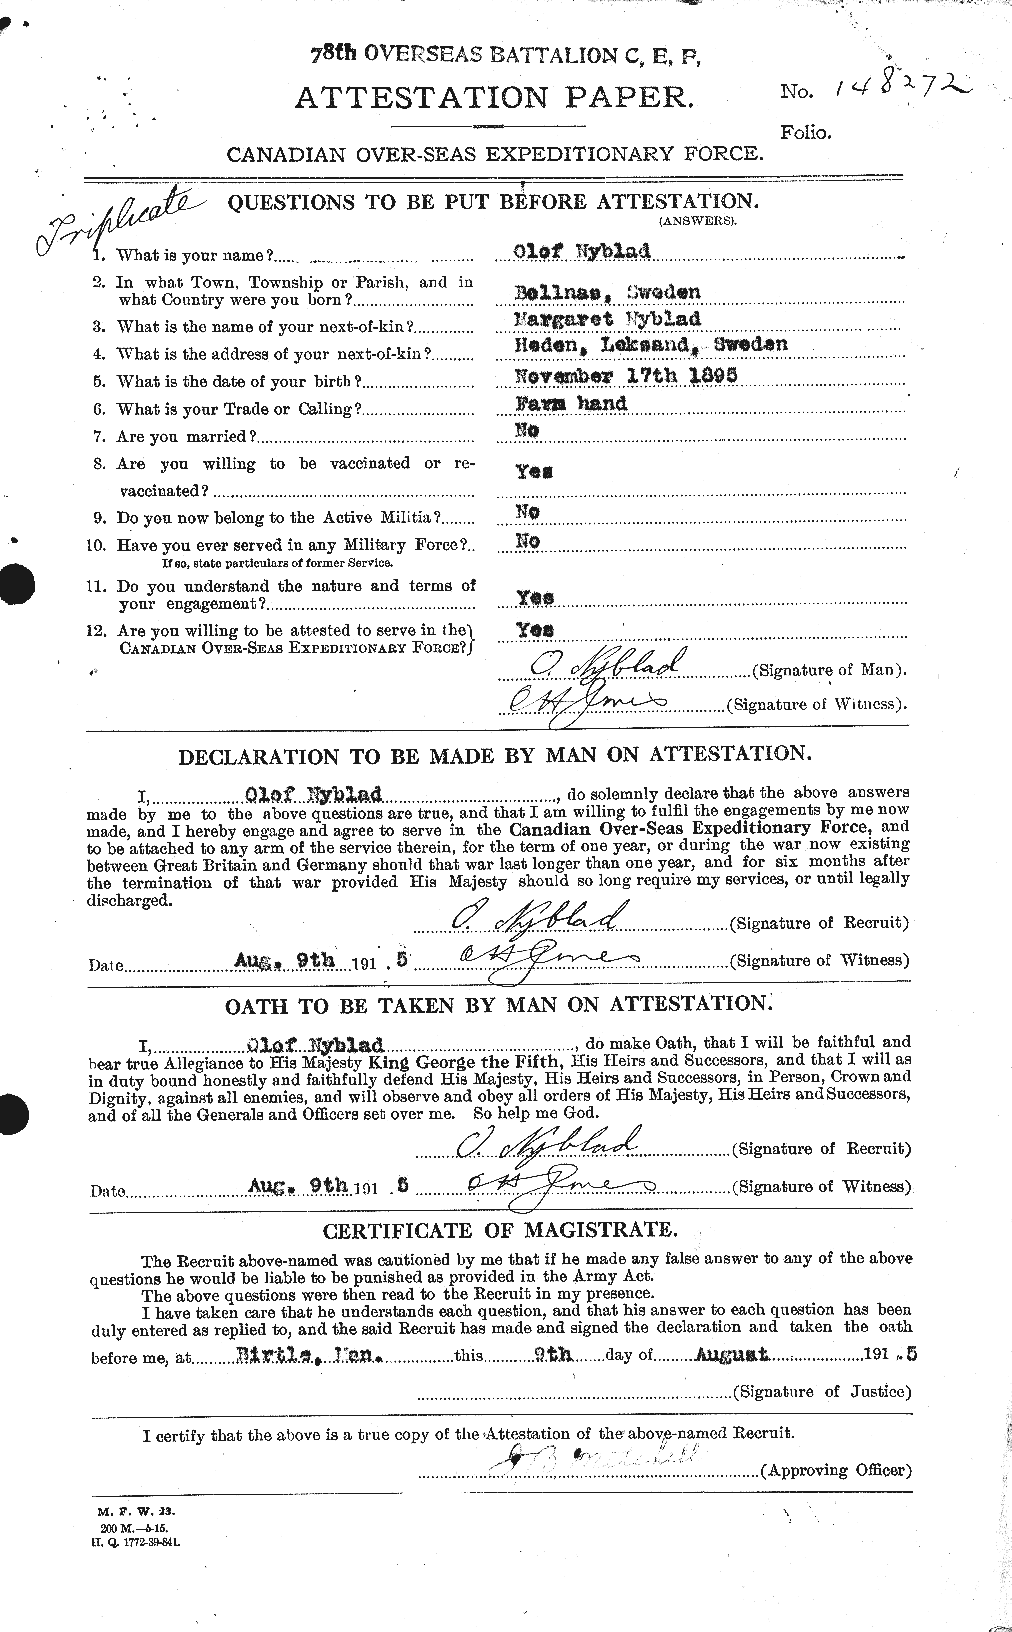 Personnel Records of the First World War - CEF 554774a